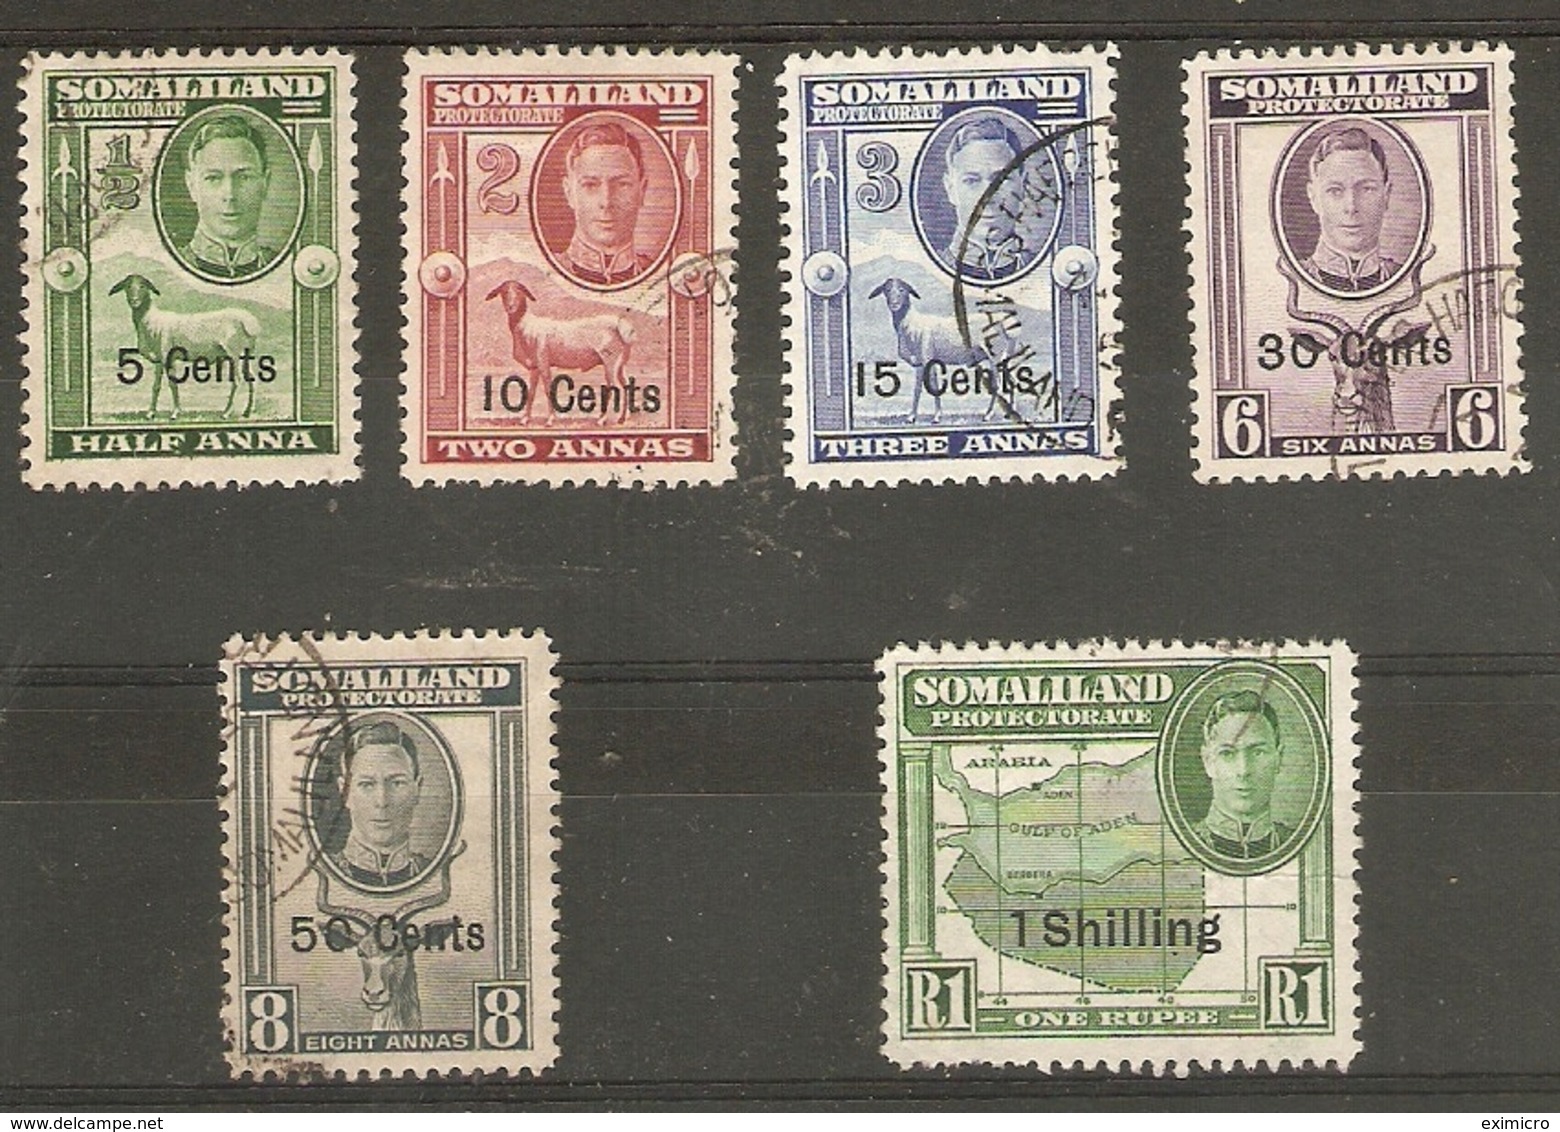 SOMALILAND 1951 VALUES TO 1s On 1R BETWEEN SG 125 And SG 132 FINE USED Cat £14+ - Somaliland (Protectoraat ...-1959)